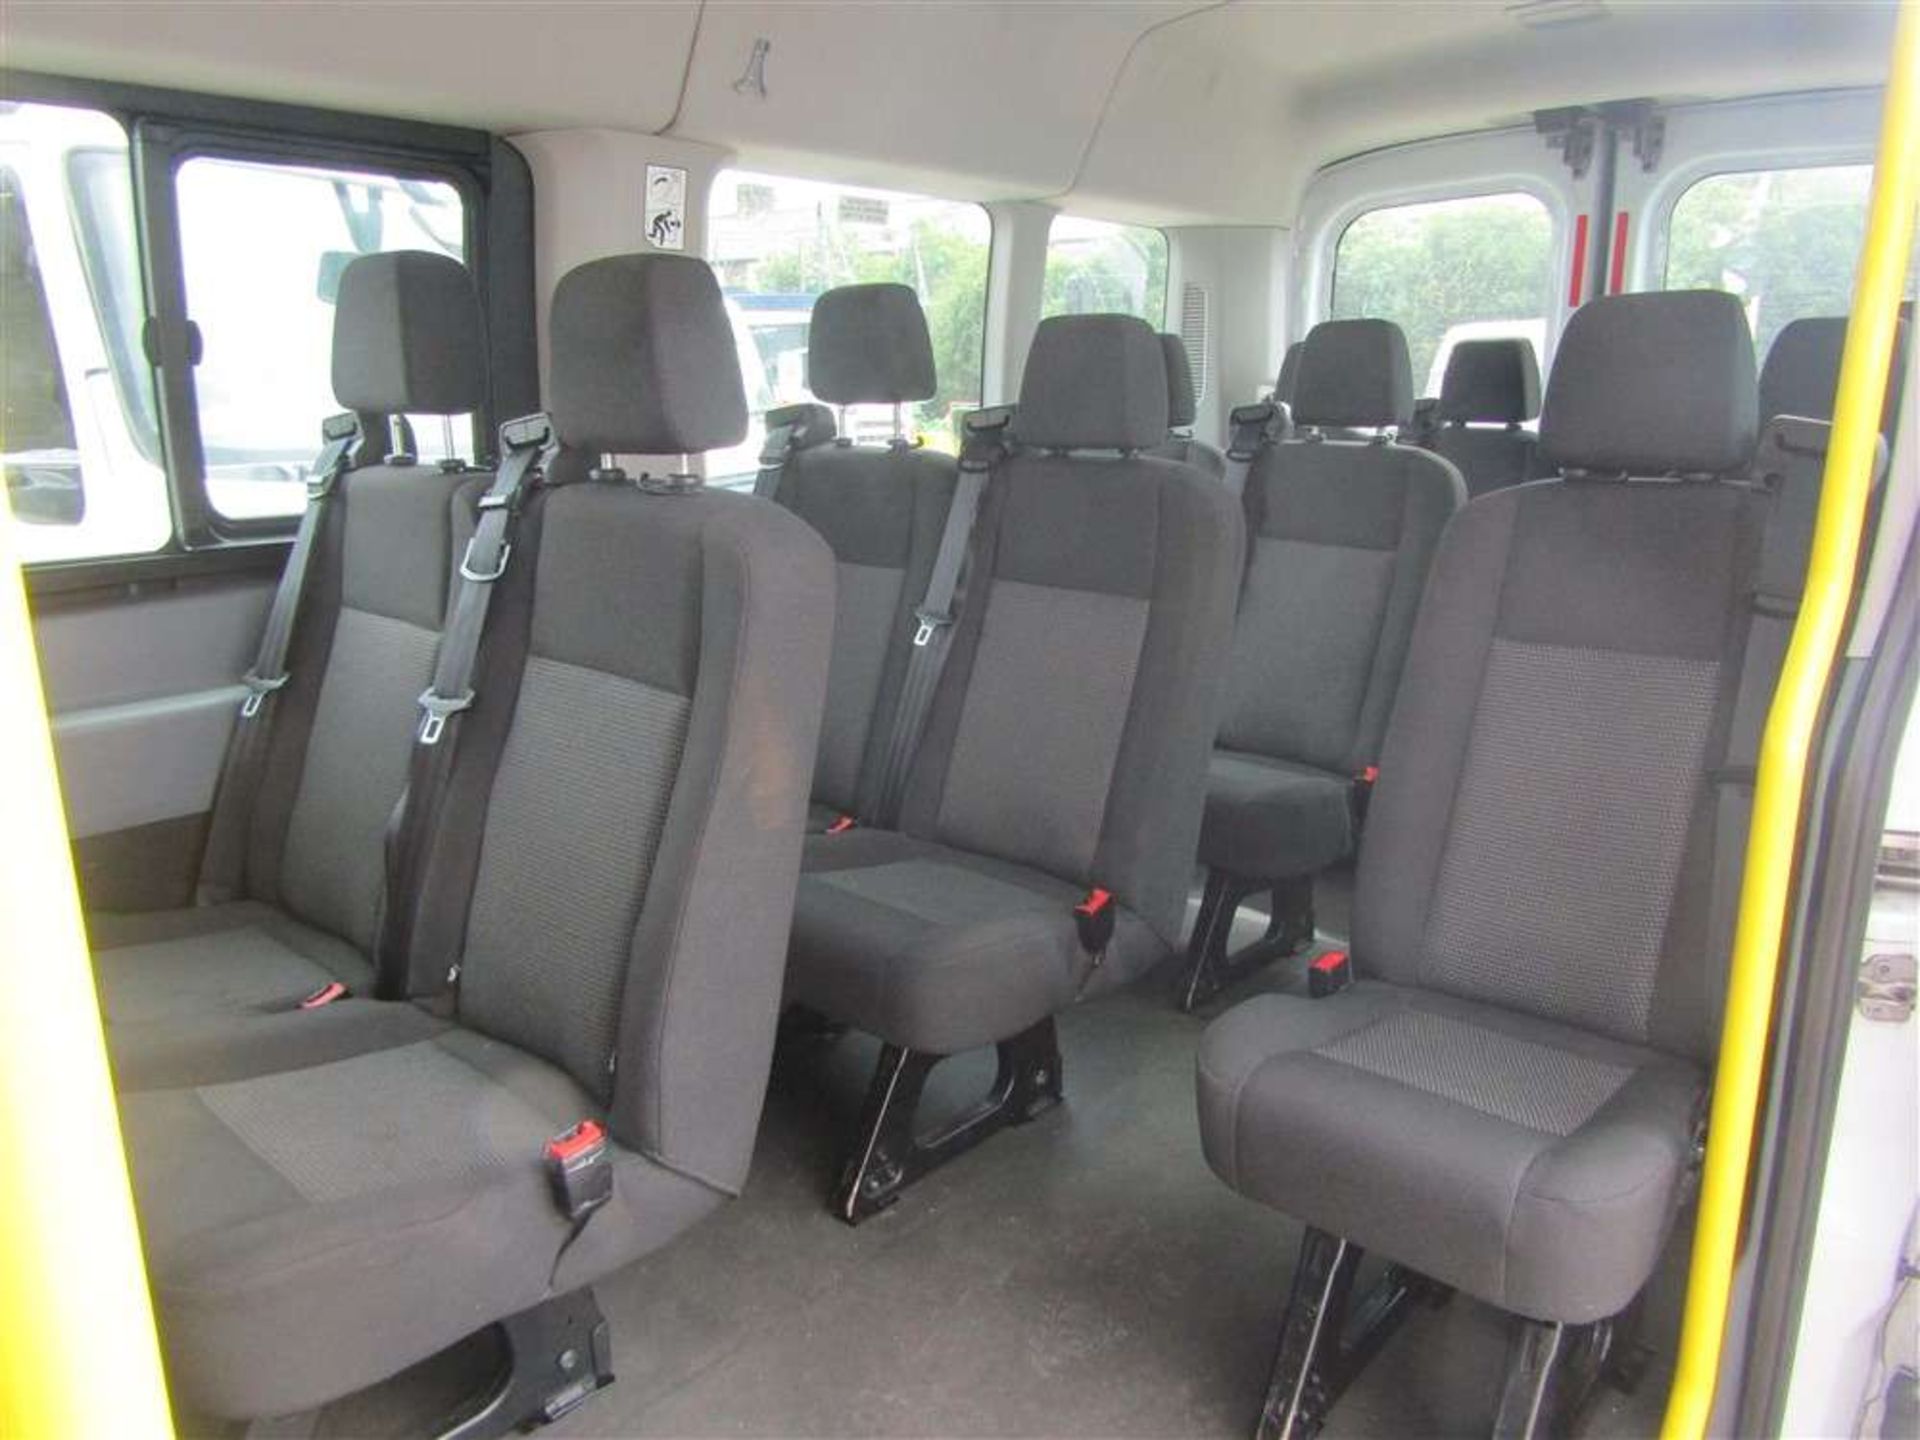 2014 14 reg Ford Transit Minibus (Direct Council) - Image 6 of 6